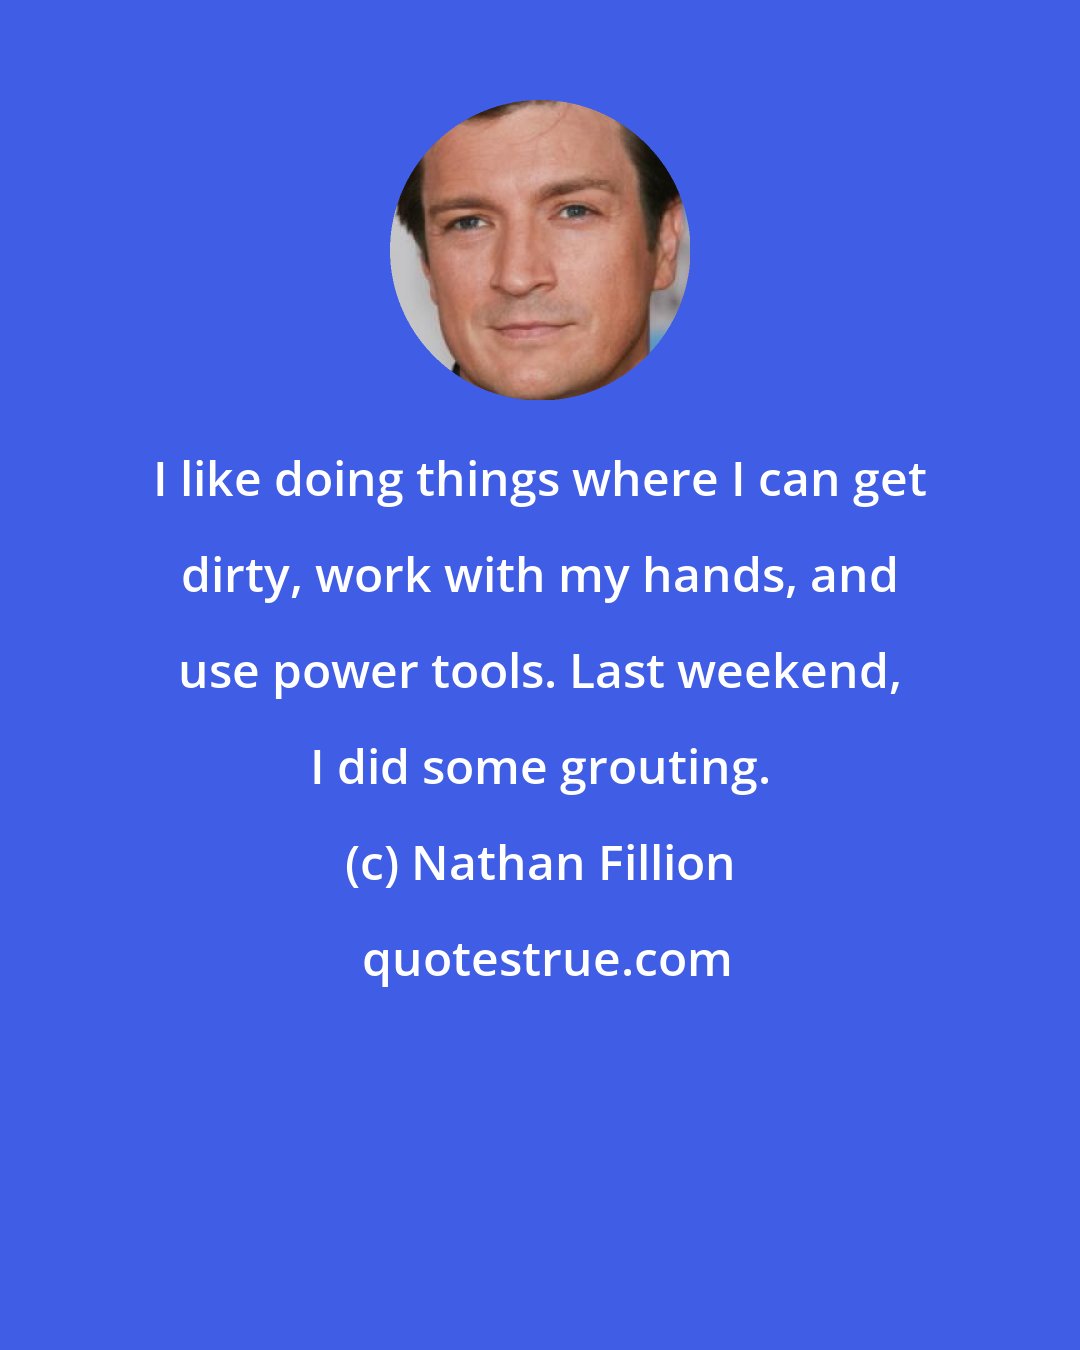 Nathan Fillion: I like doing things where I can get dirty, work with my hands, and use power tools. Last weekend, I did some grouting.